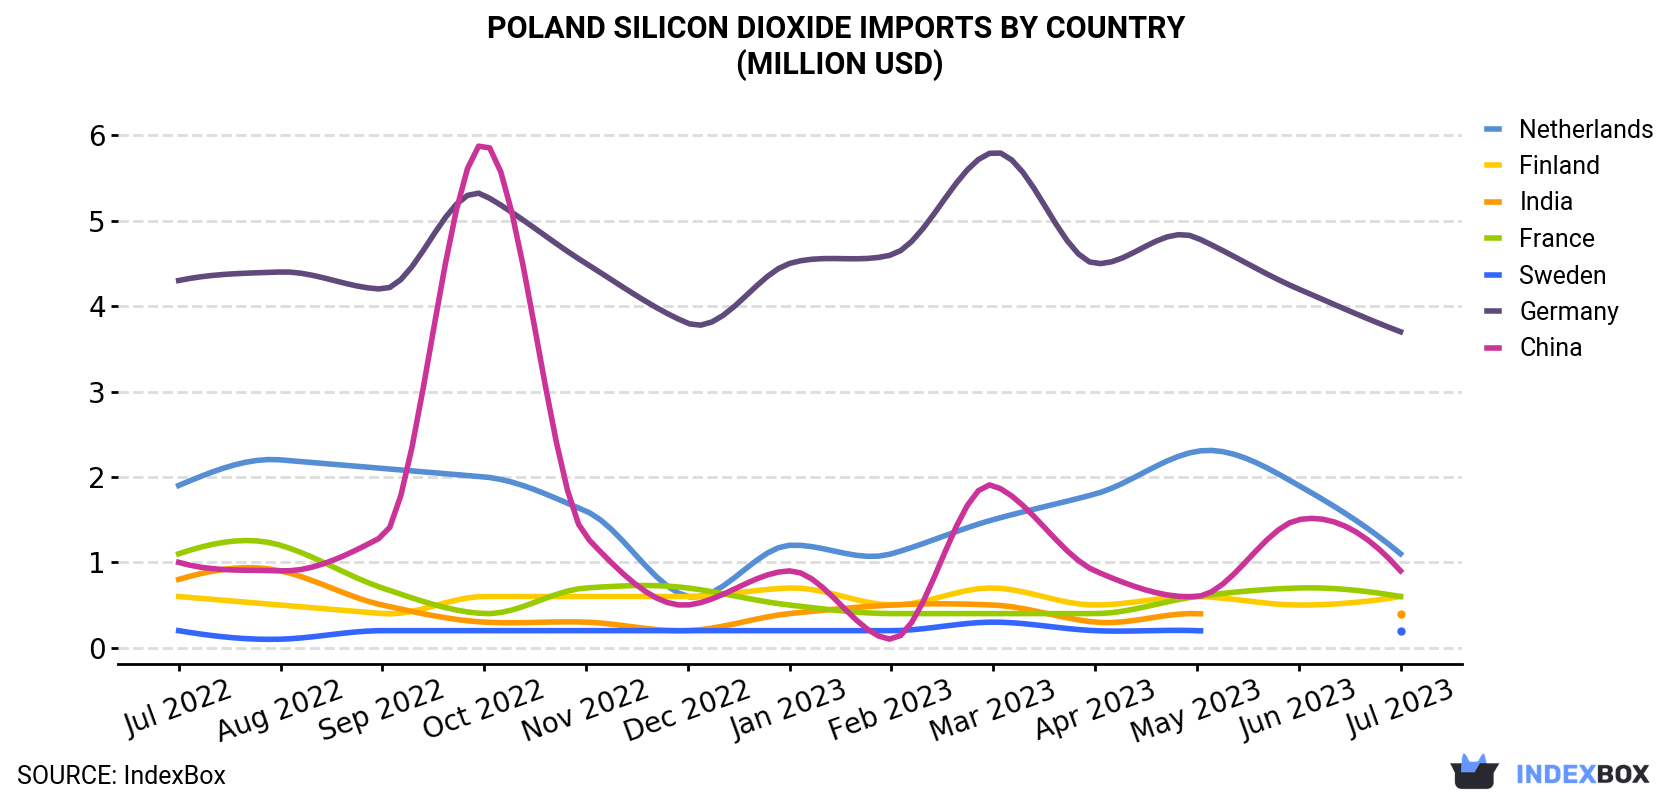 Poland Silicon Dioxide Imports By Country (Million USD)